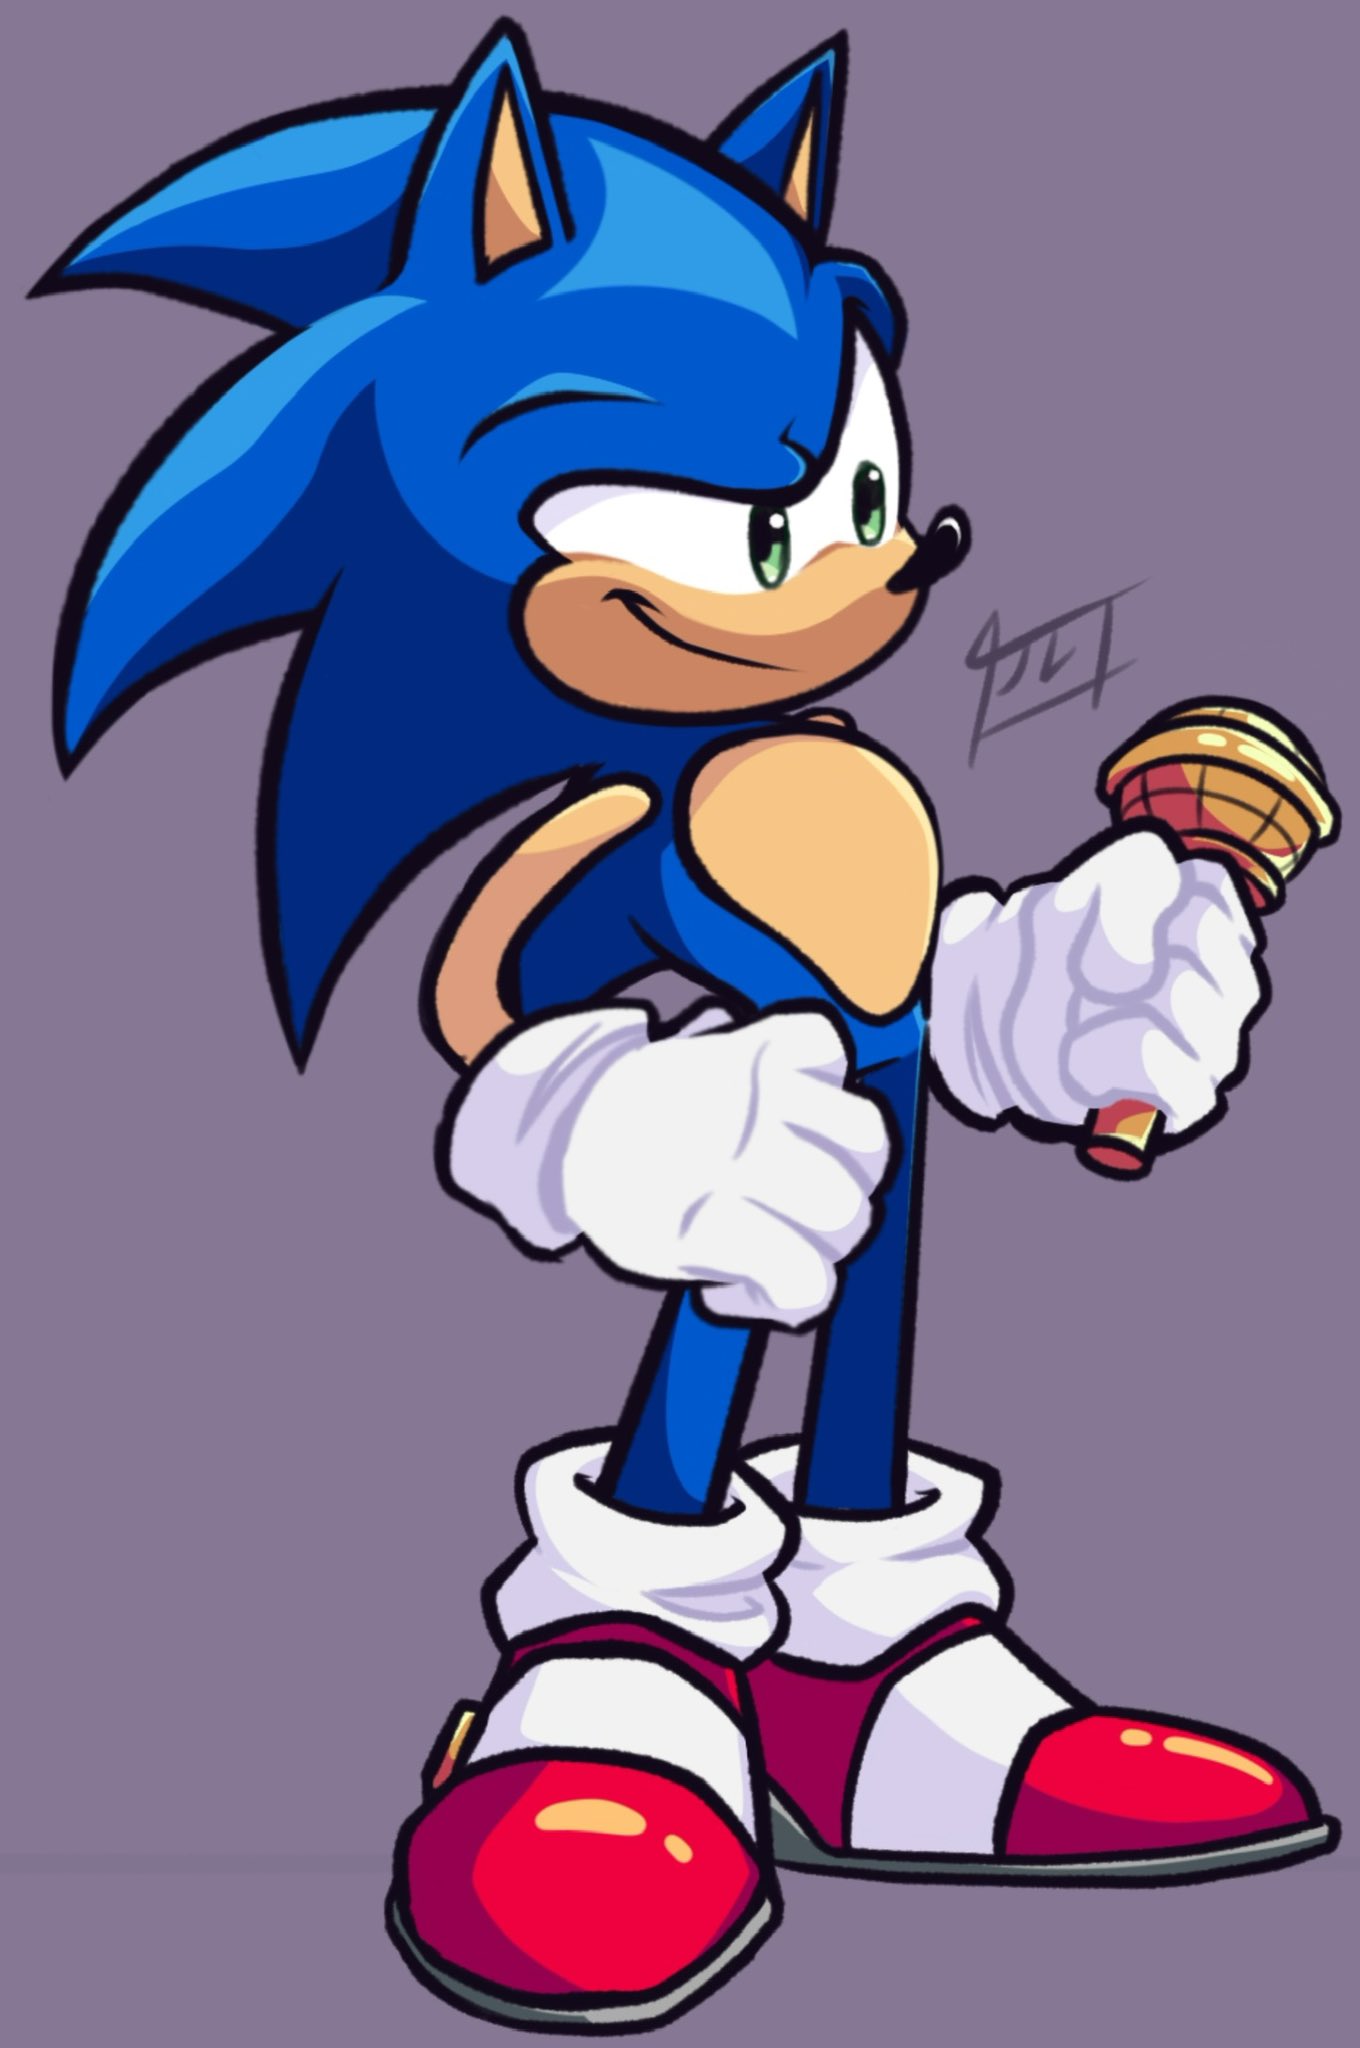 ✽{Saiya4Fox}✽ on X: If I ever reach 2500 followers I'll show the complete  sprite of this sonic. #fnf #SonicTheHedegehog  / X